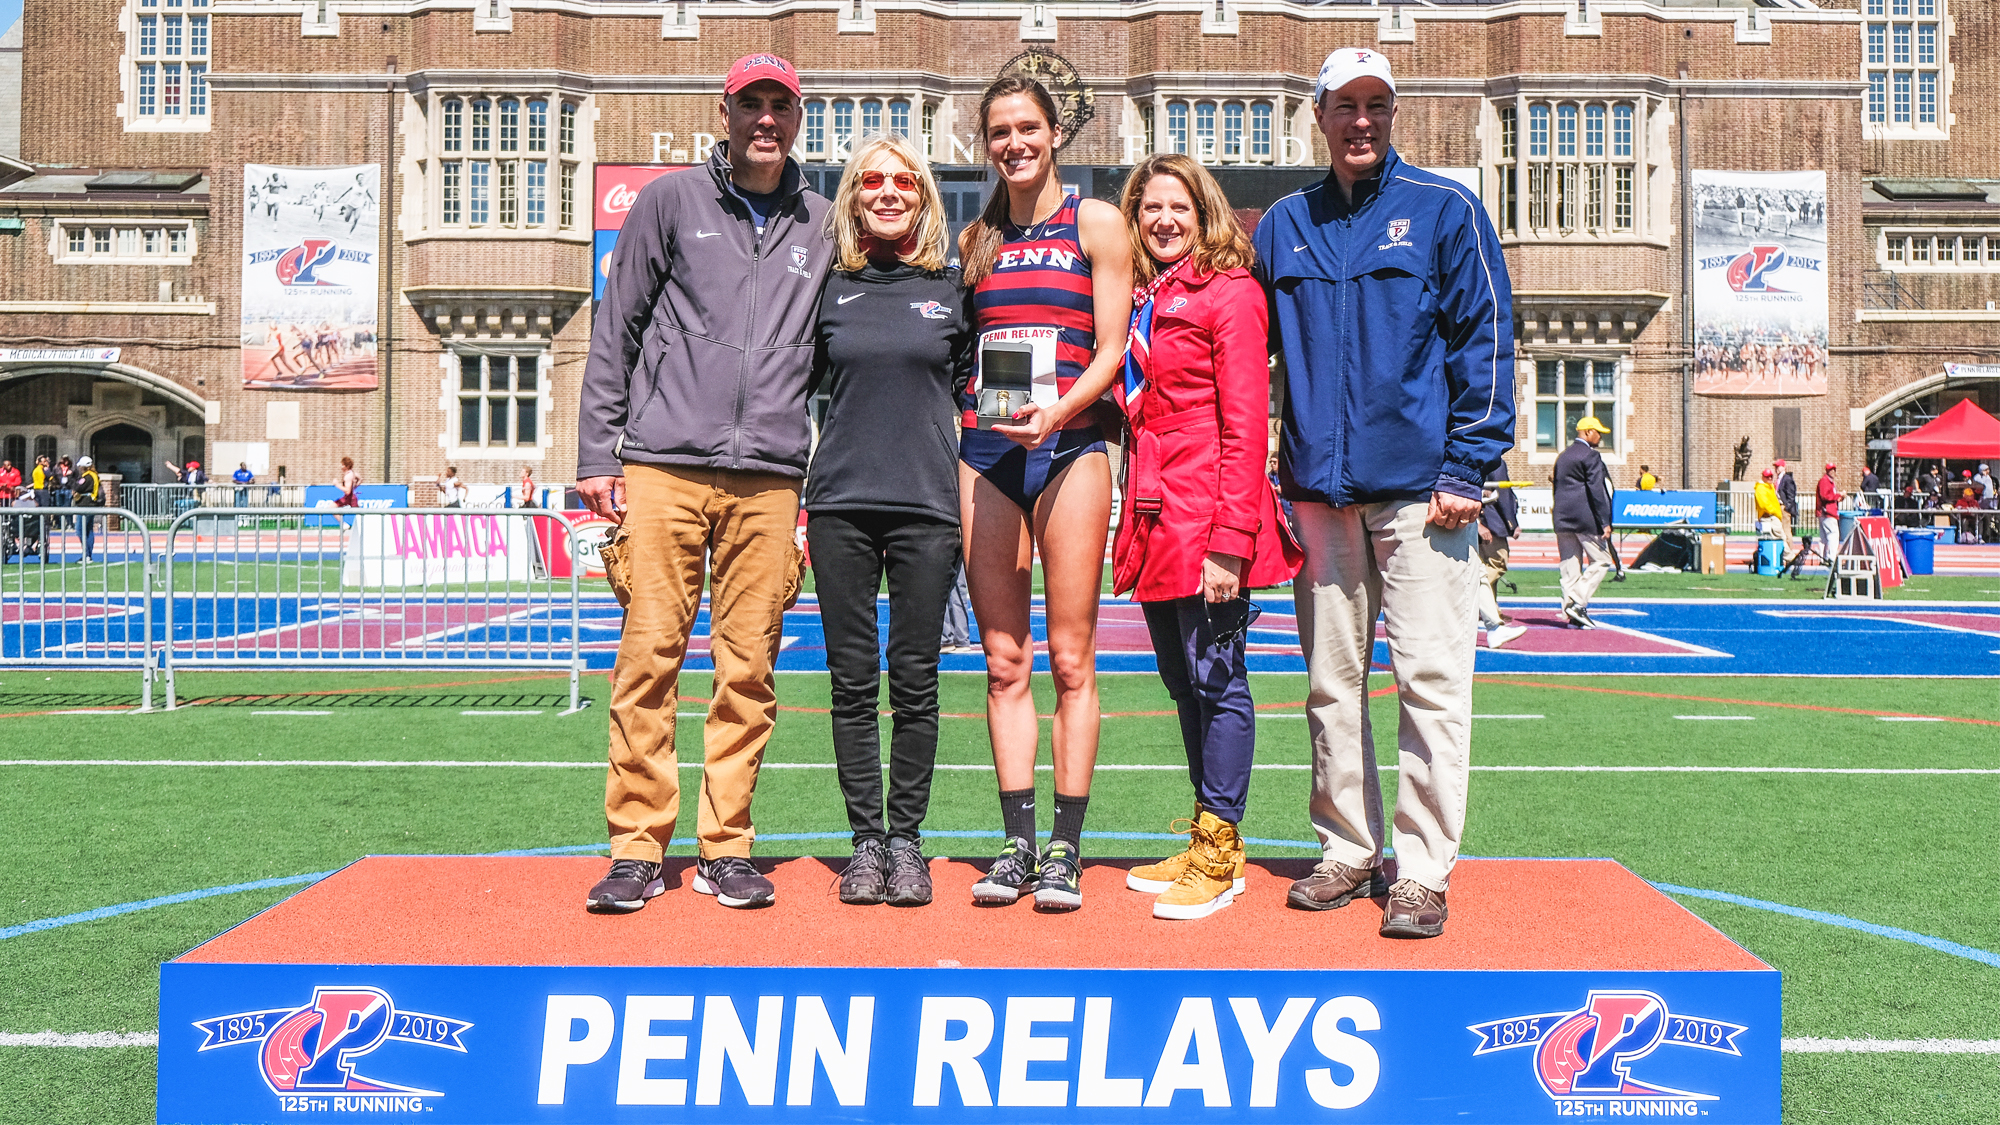 Anna Peyton Malizia poses with Dr. Amy Gutmann and AD Calhoun at the Penn Relays.